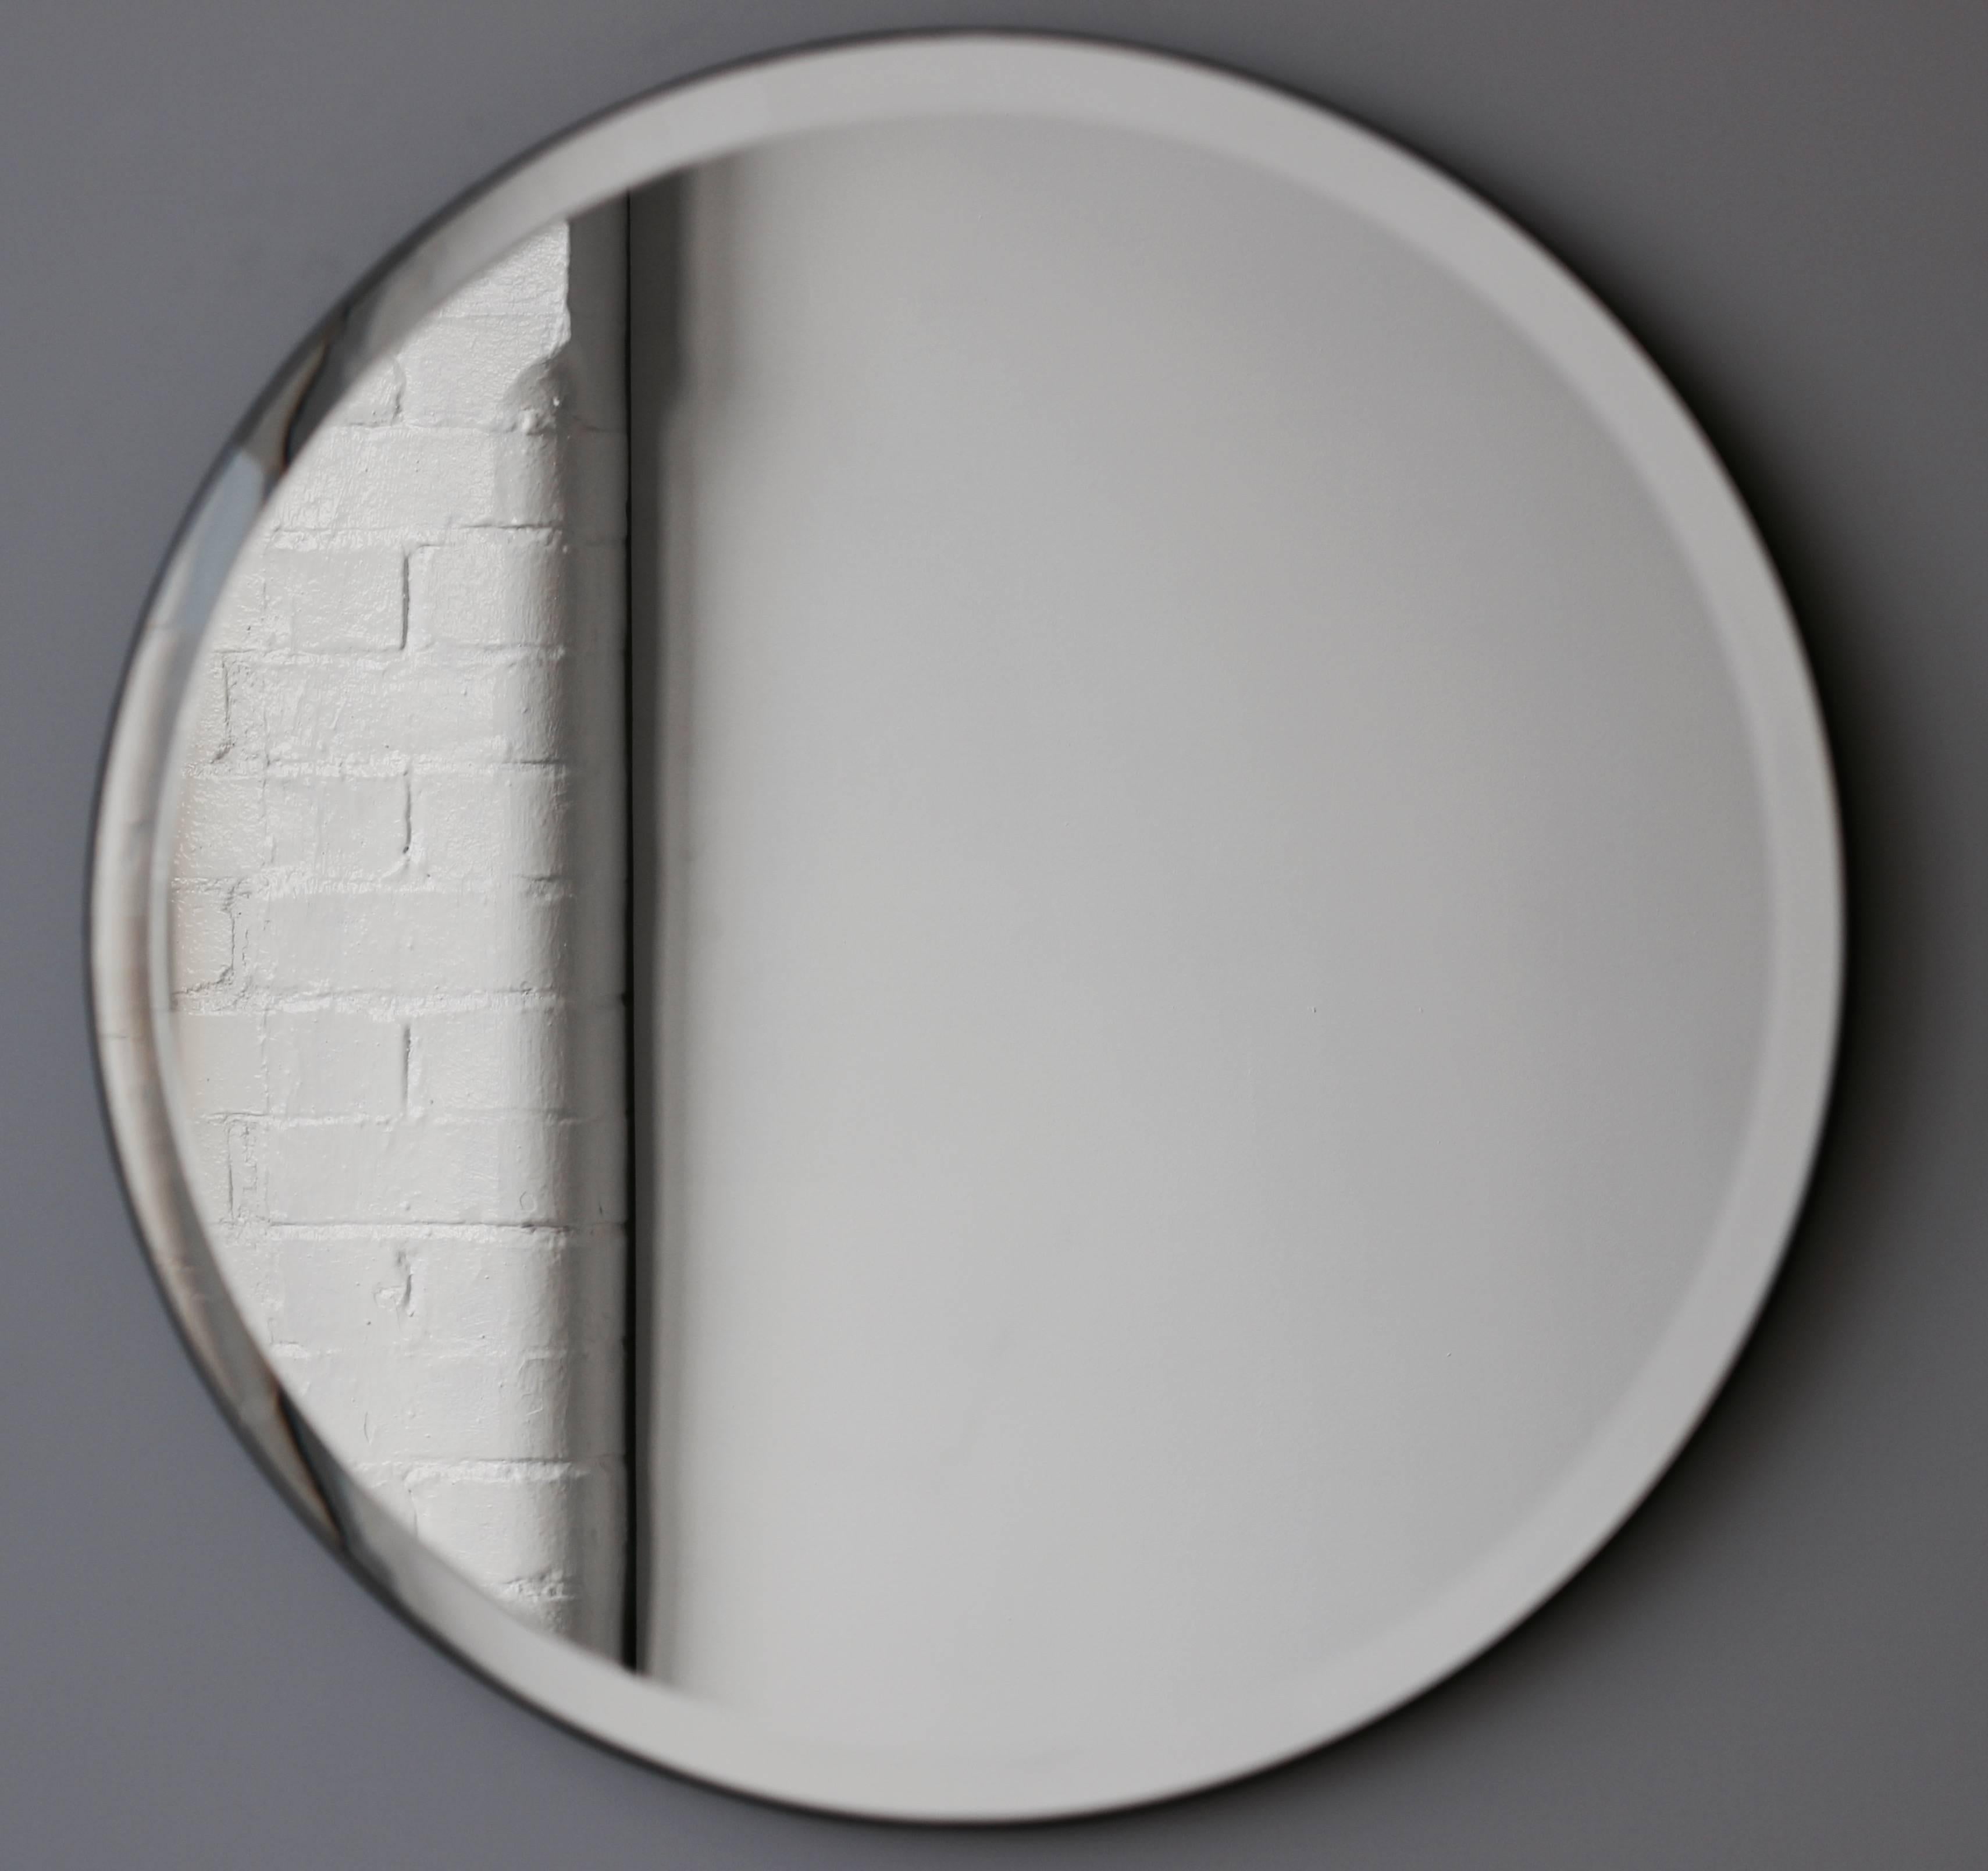 Delightful Orbis™ round frameless mirror with an elegant bevel, velvet backing and optional brass clips. Designed and handcrafted in London, UK.

Our mirrors are designed with an integrated French cleat (split batten) system that ensures the mirror